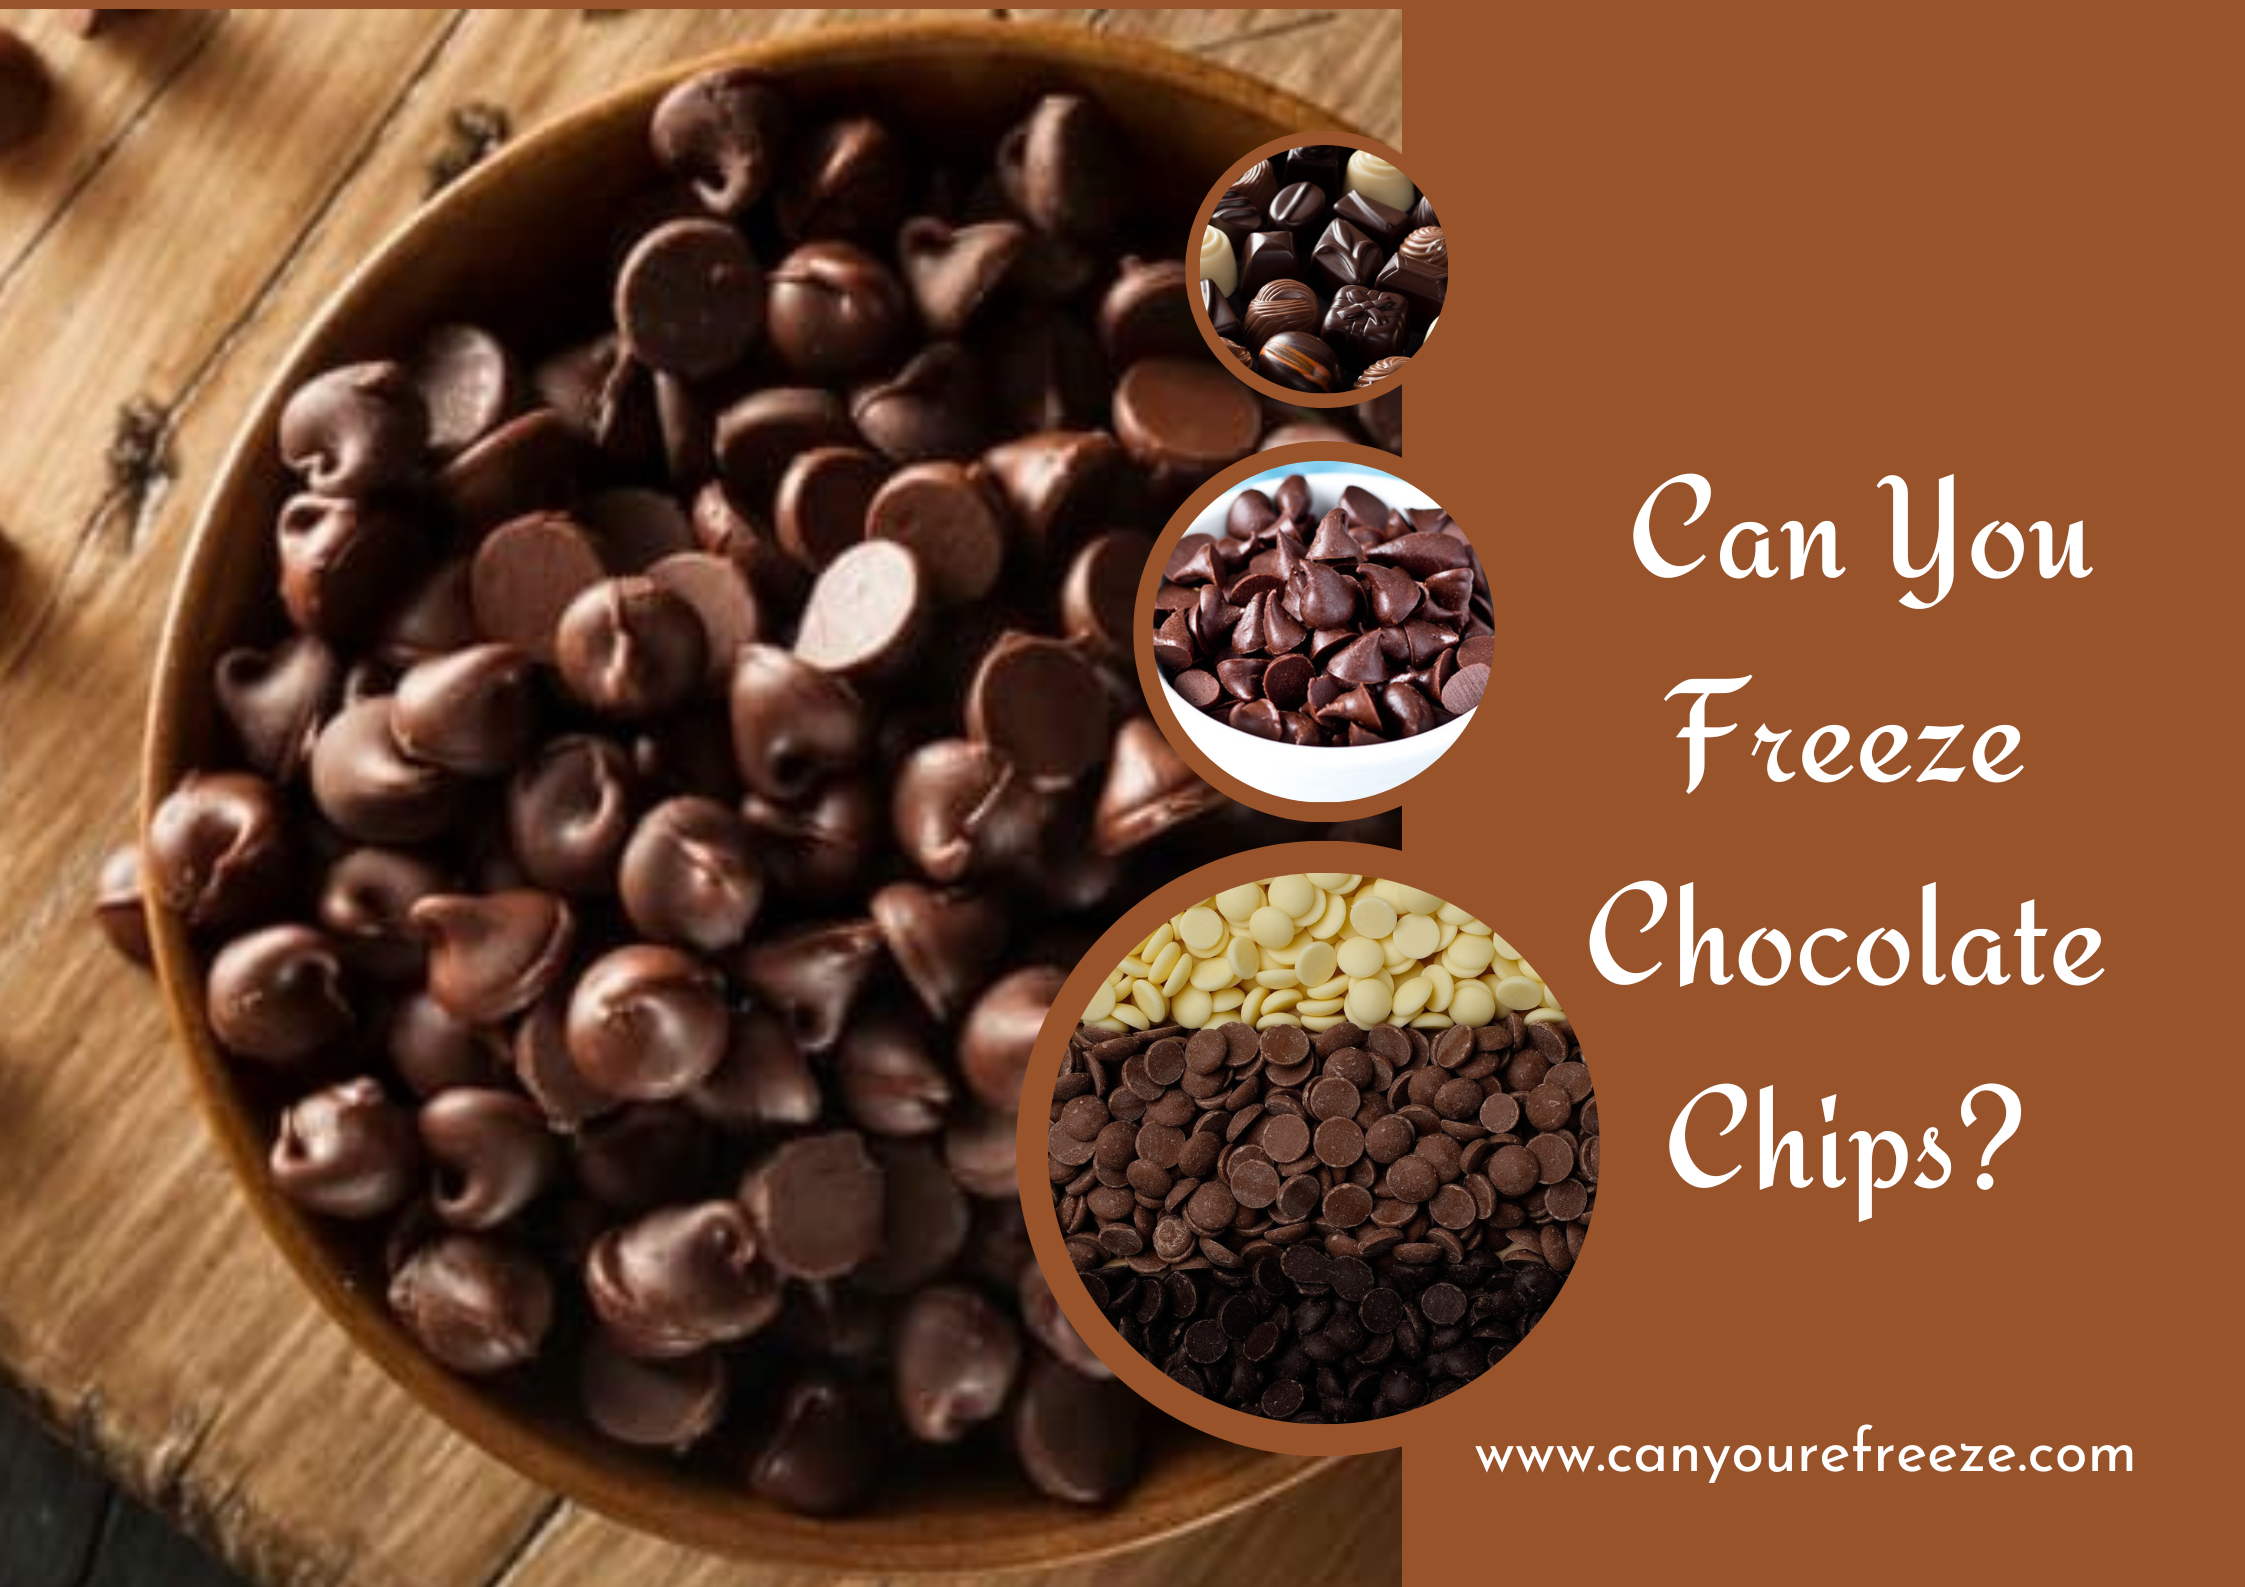 Can You Freeze Chocolate Chips